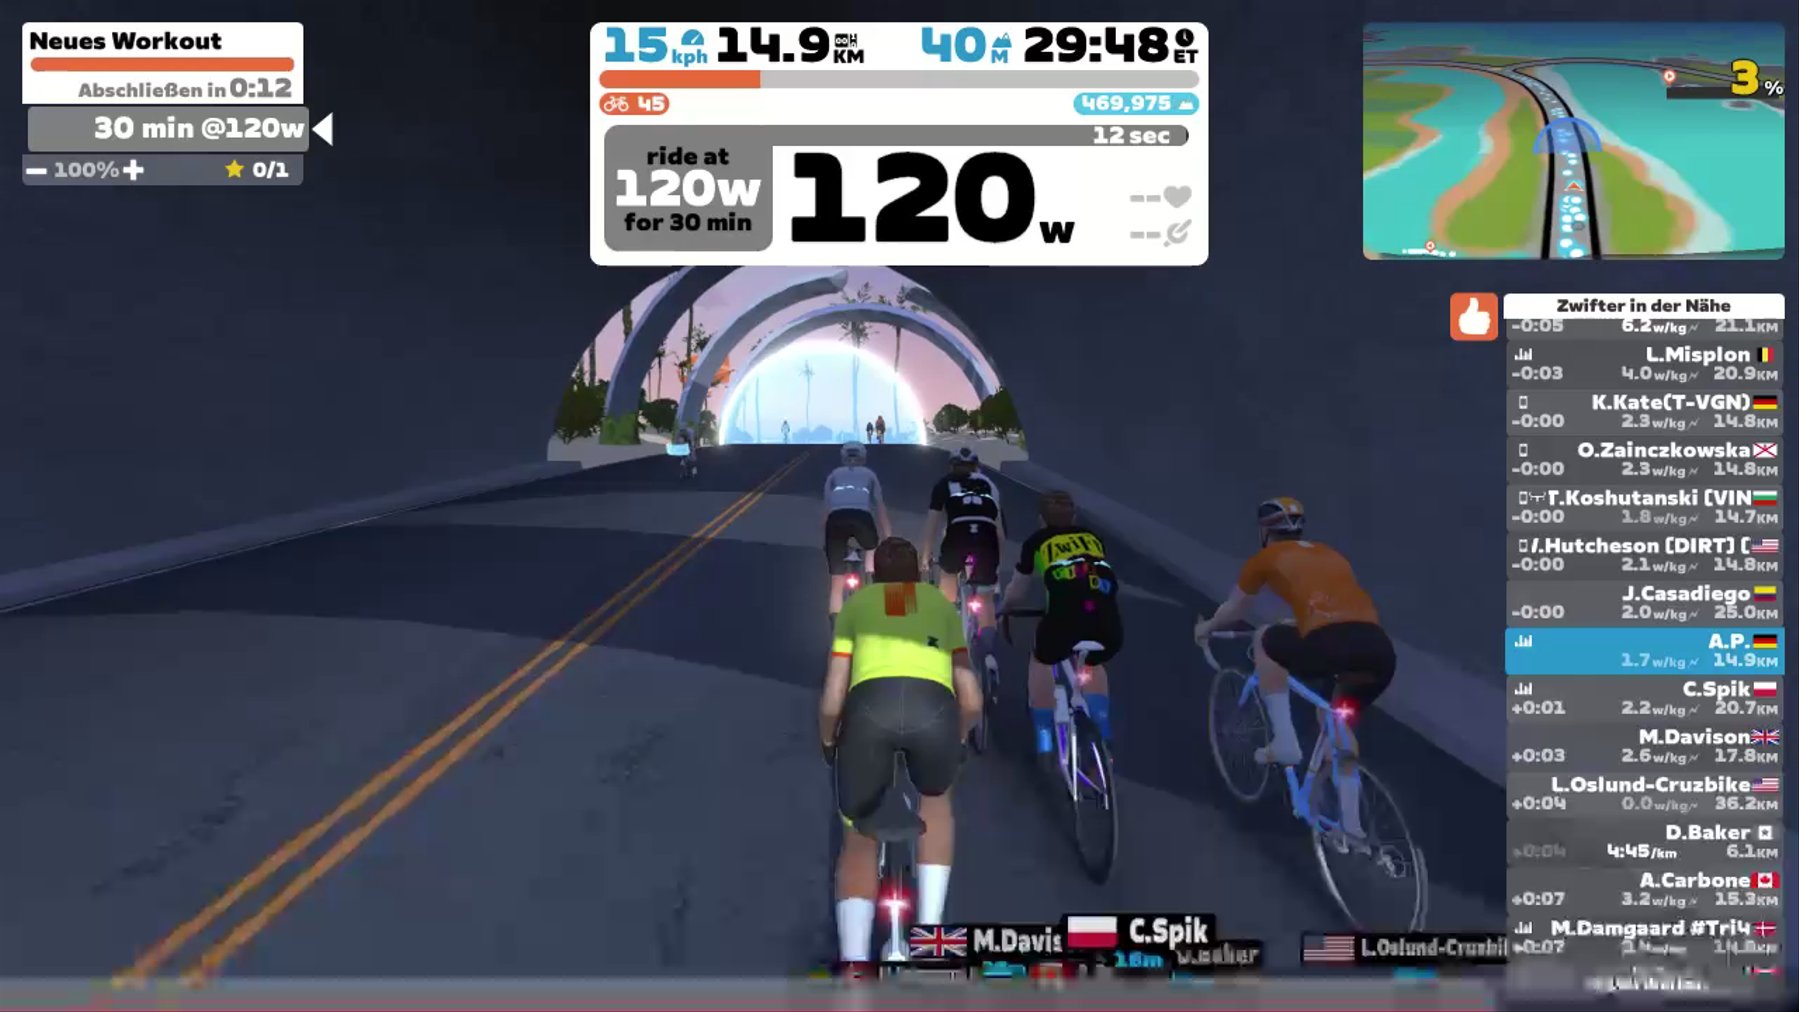 Zwift - Neues Workout in Watopia